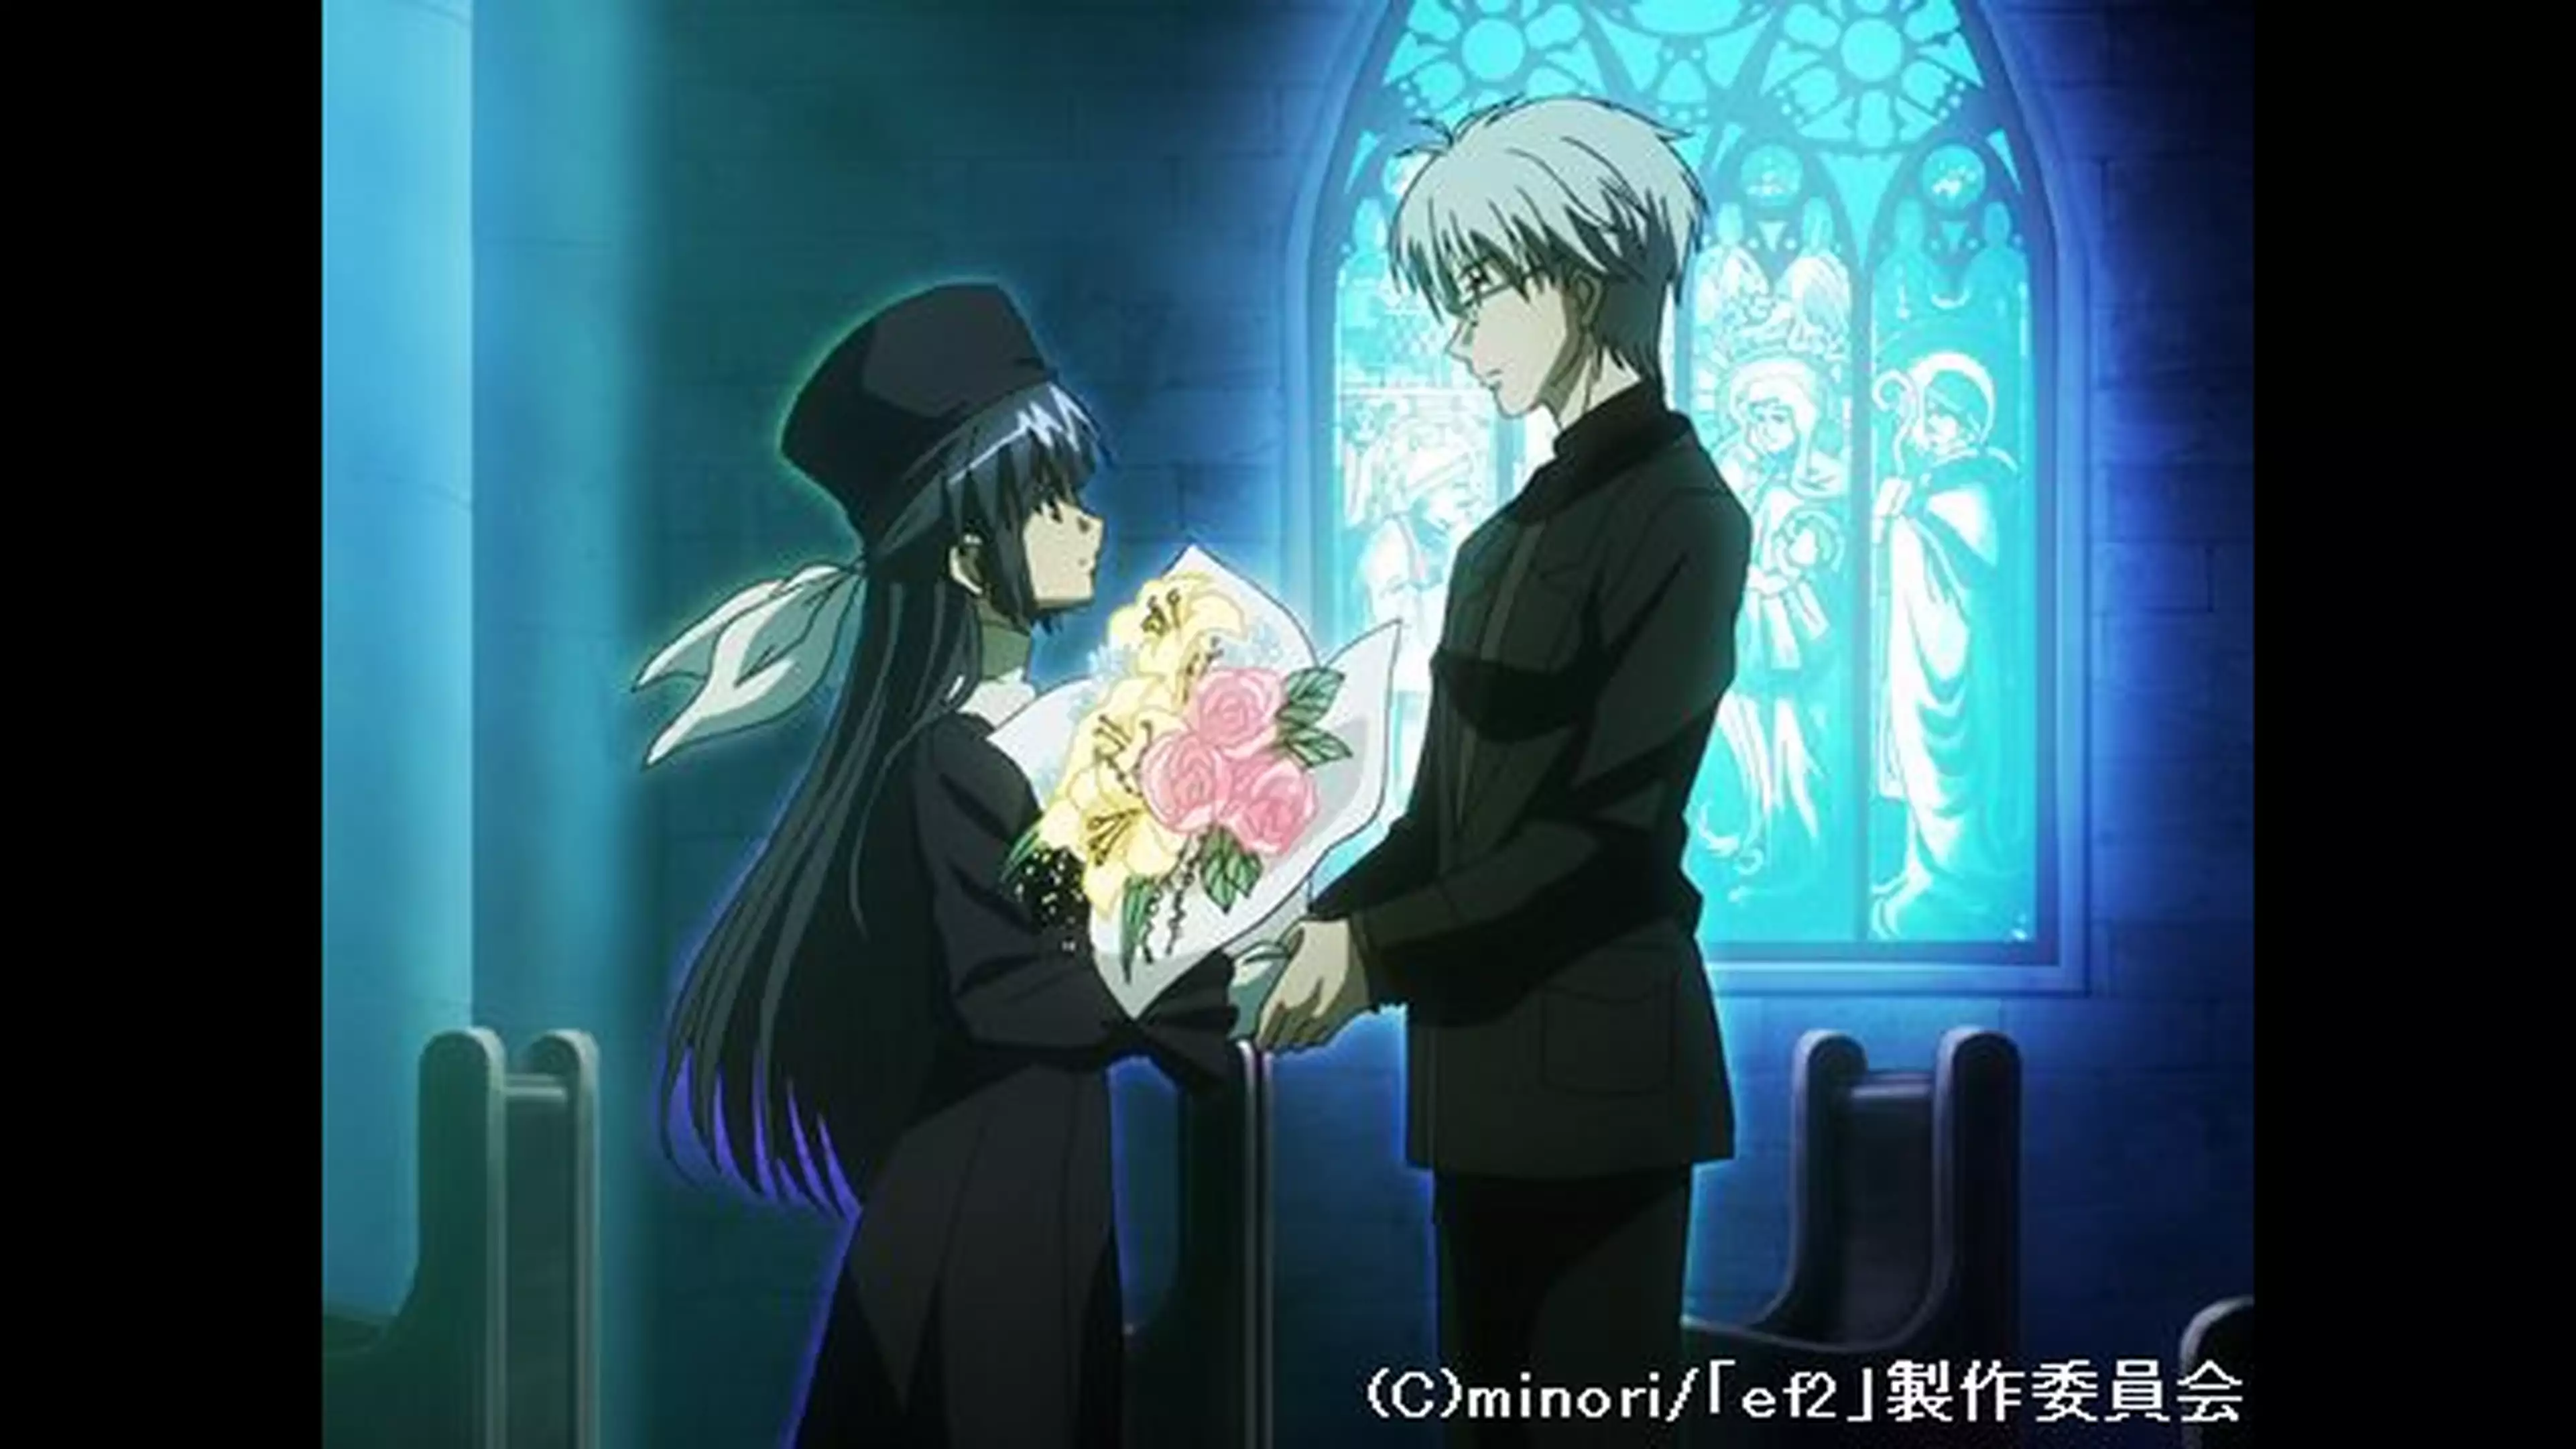 Ef A Tale Of Melodies 12 Forever アニメ 08年 の動画視聴 あらすじ U Next